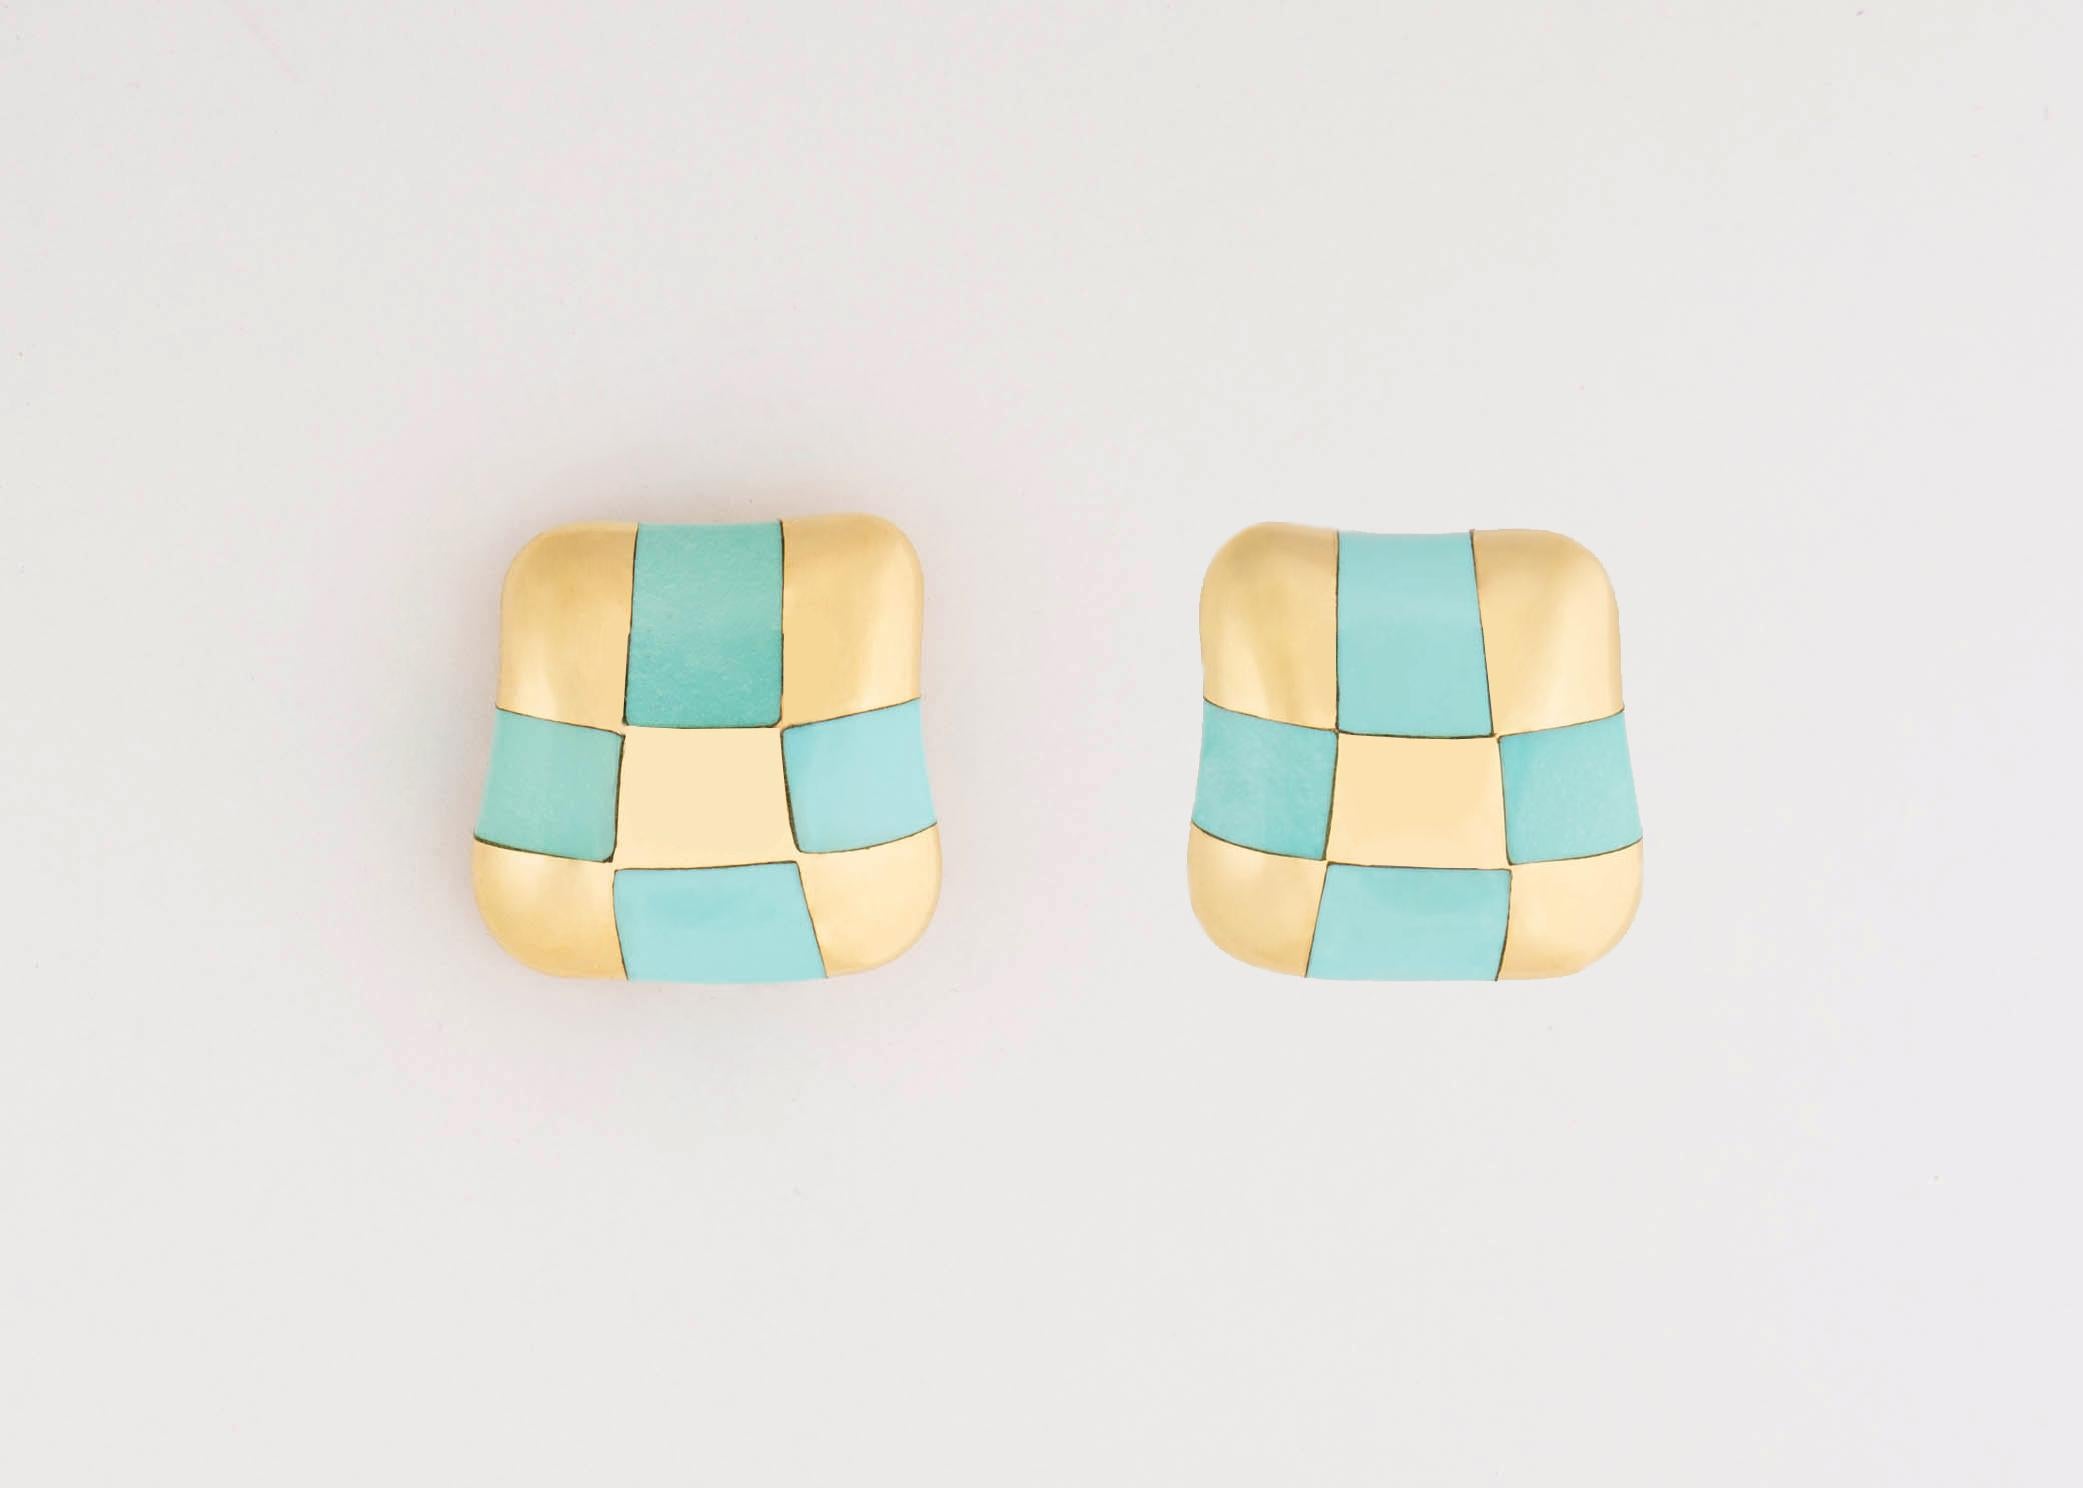 Angela Cummings began her career under the Tiffany & Co. umbrella before setting out on her own. Her designs featuring inlay stones in simple geometric patterns have become iconic and collectable.  This pair featuring turquoise is rarely available.